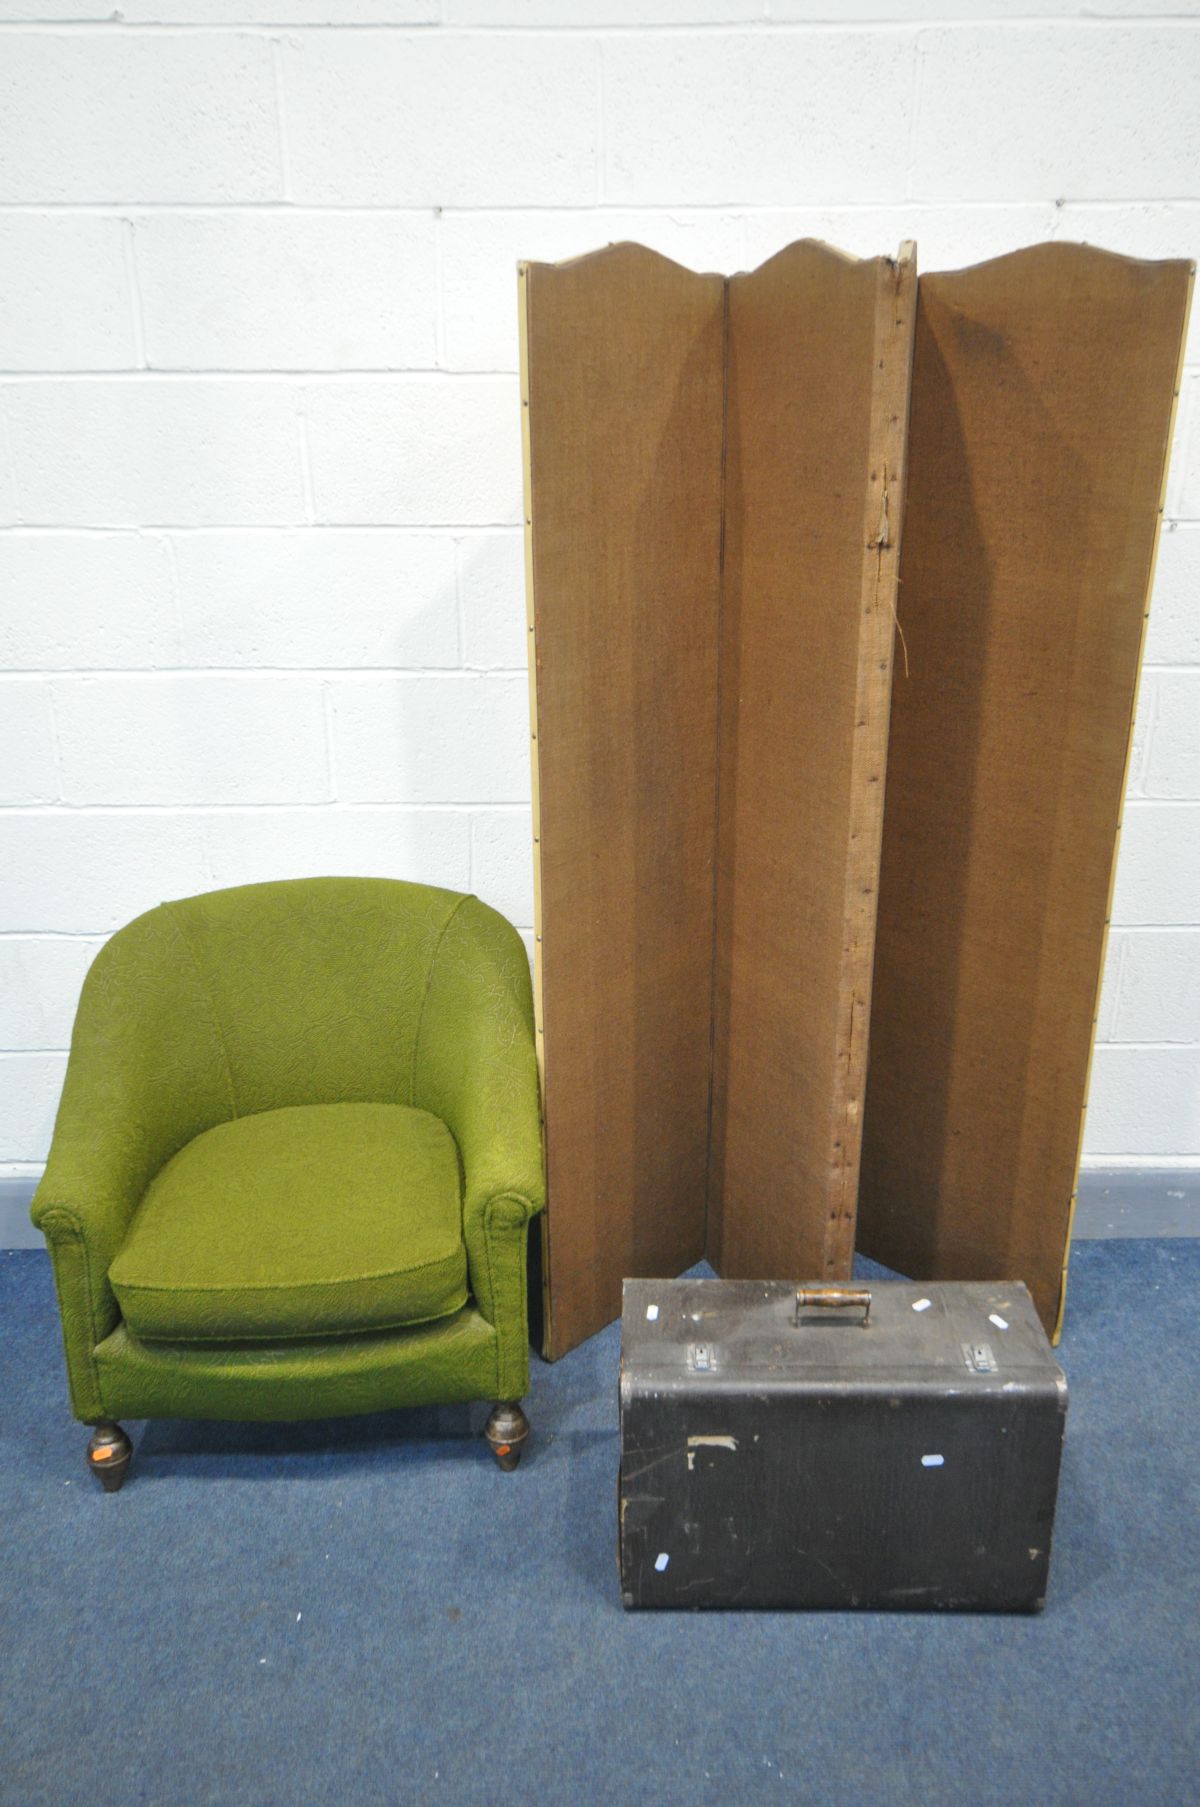 AN EARLY 20TH CENTURY TUB CHAIR with green upholstery, along with a folding floor standing screen